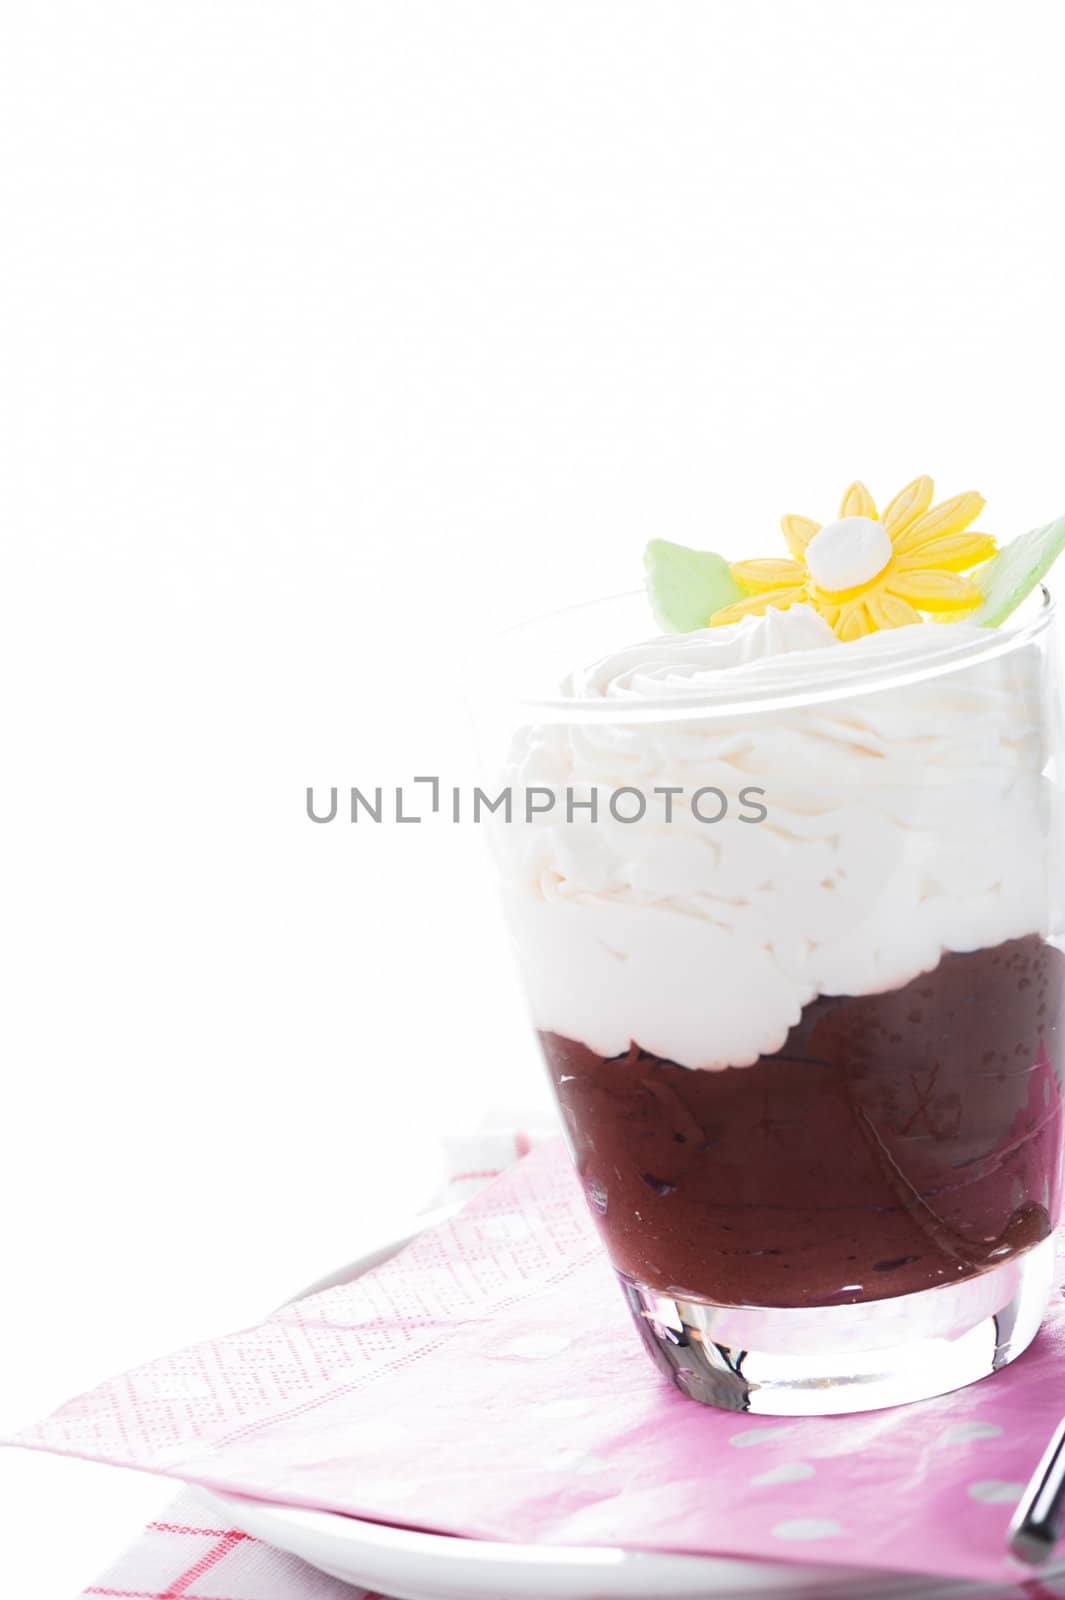 A glass with mousse au chocolat and whipped cream on white background as a studio shot